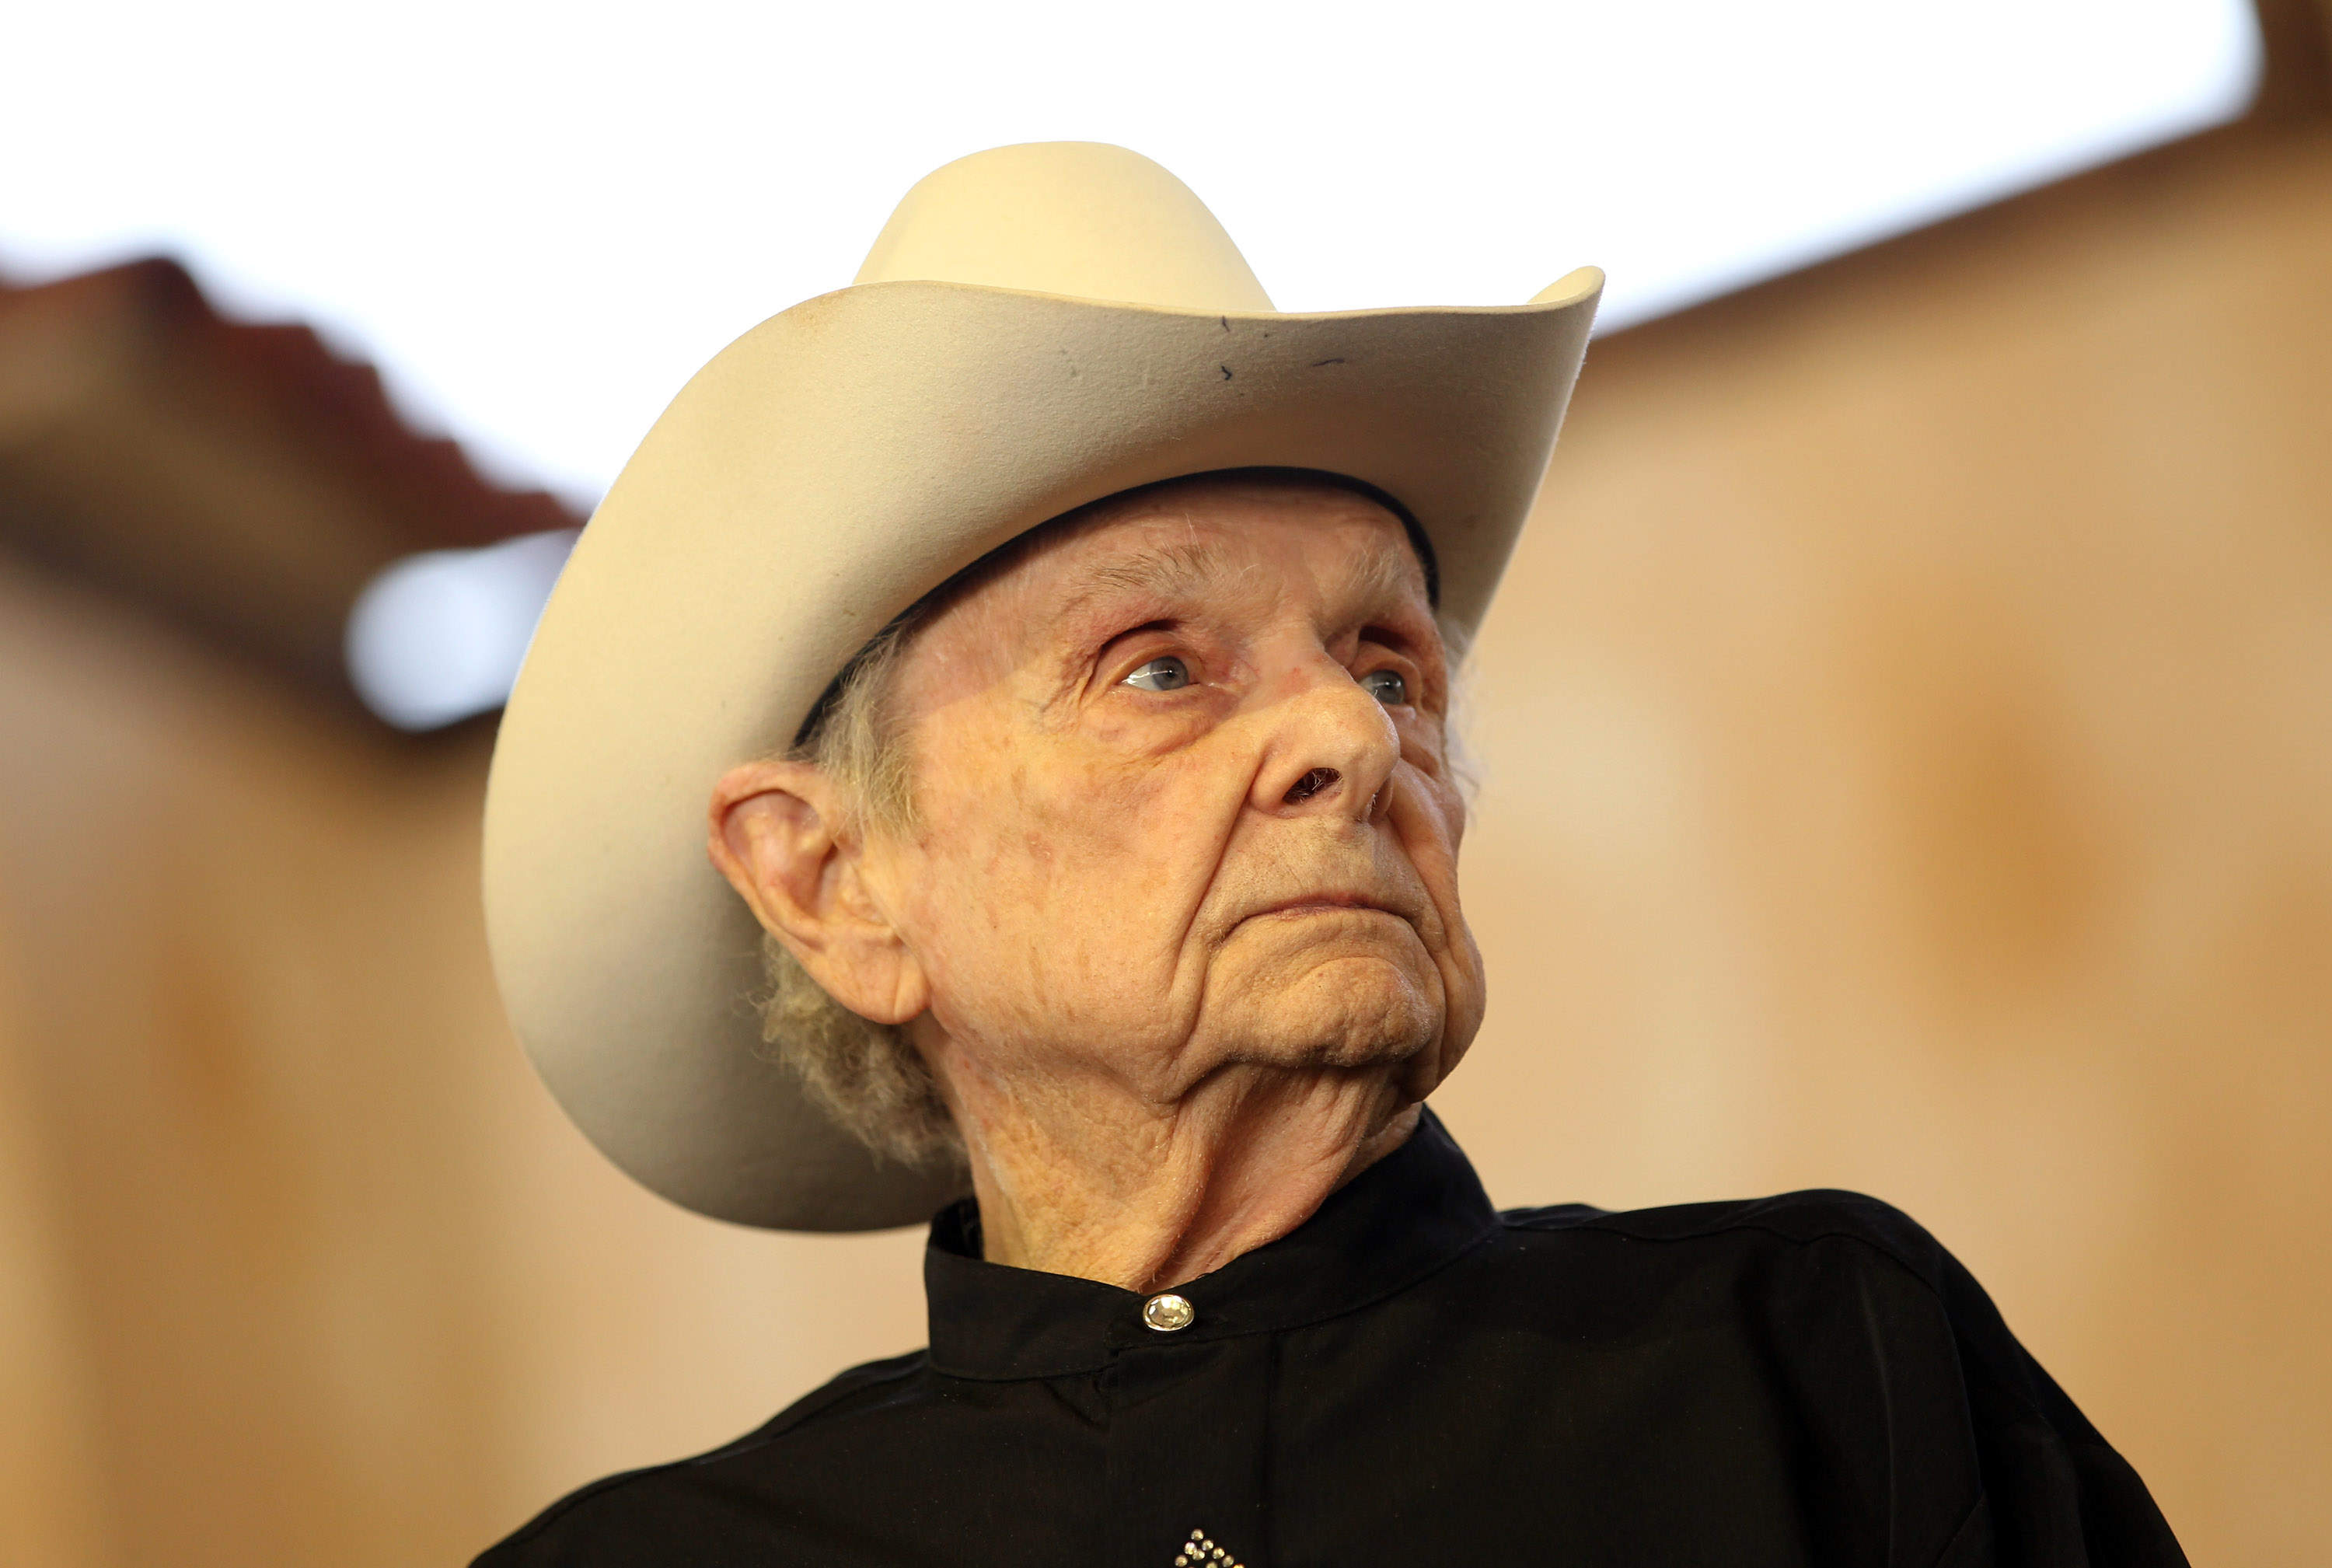 Musician Ralph Stanley performs onstage during the Stagecoach Country Music Festival on April 28, 2012 in Indio, California. (Karl Walter—Stagecoach/Getty Images)